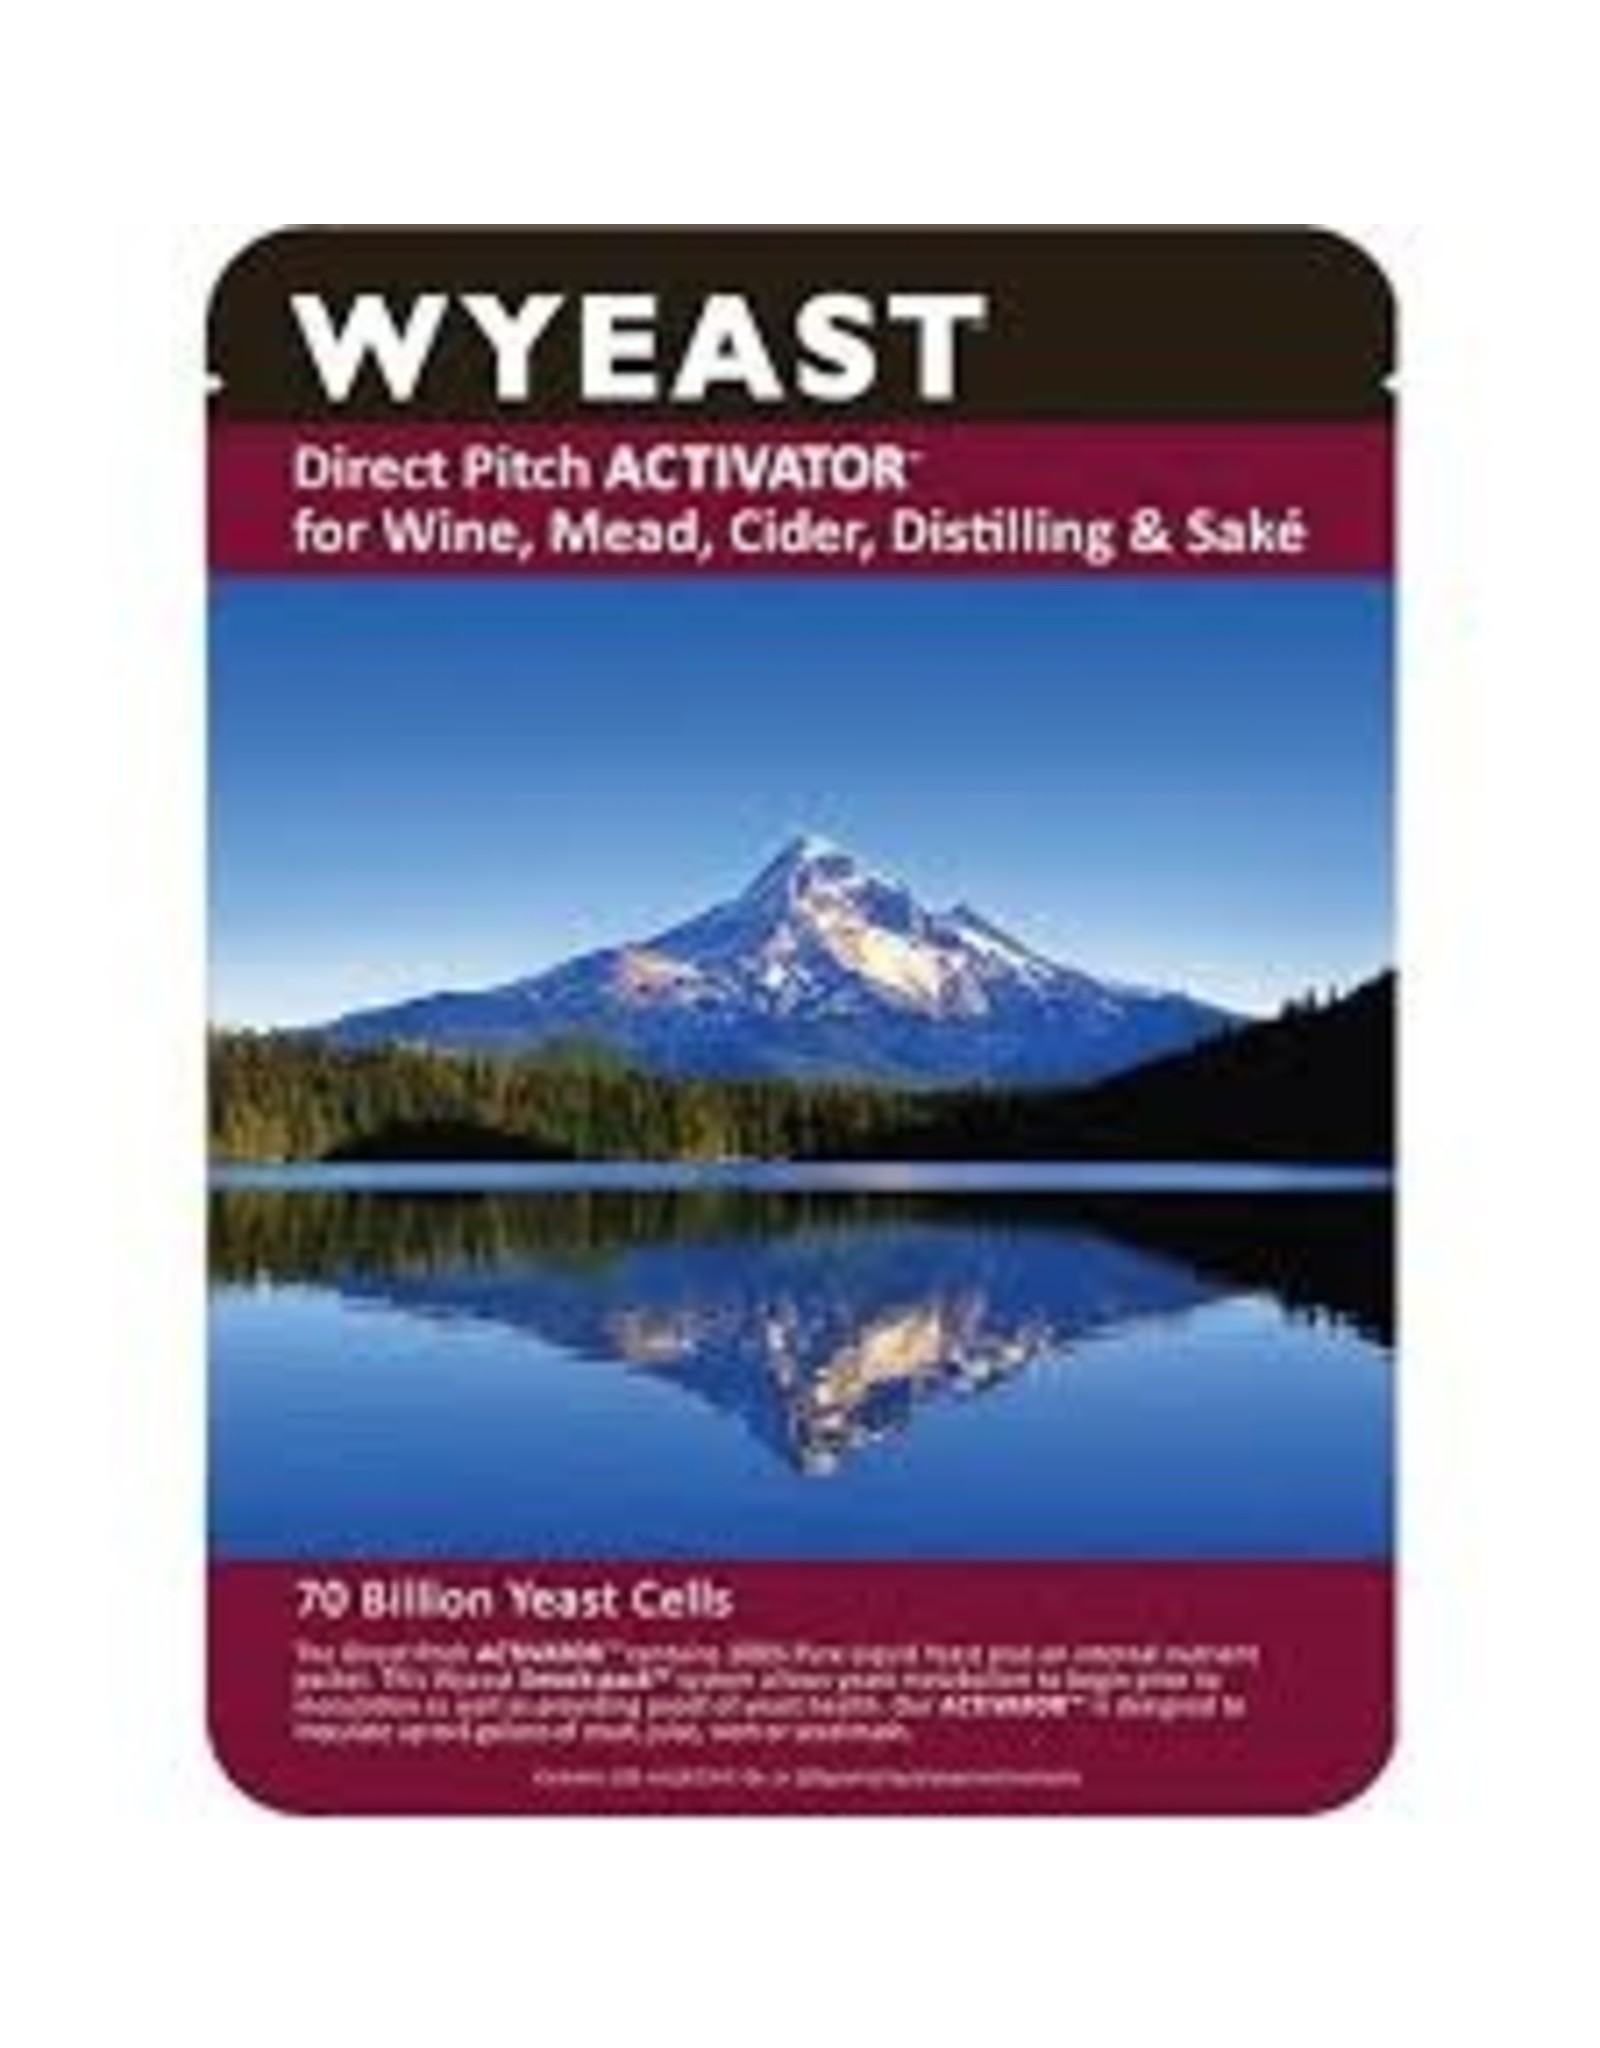 WYEAST WY4114 Er1a MALO LACTIC